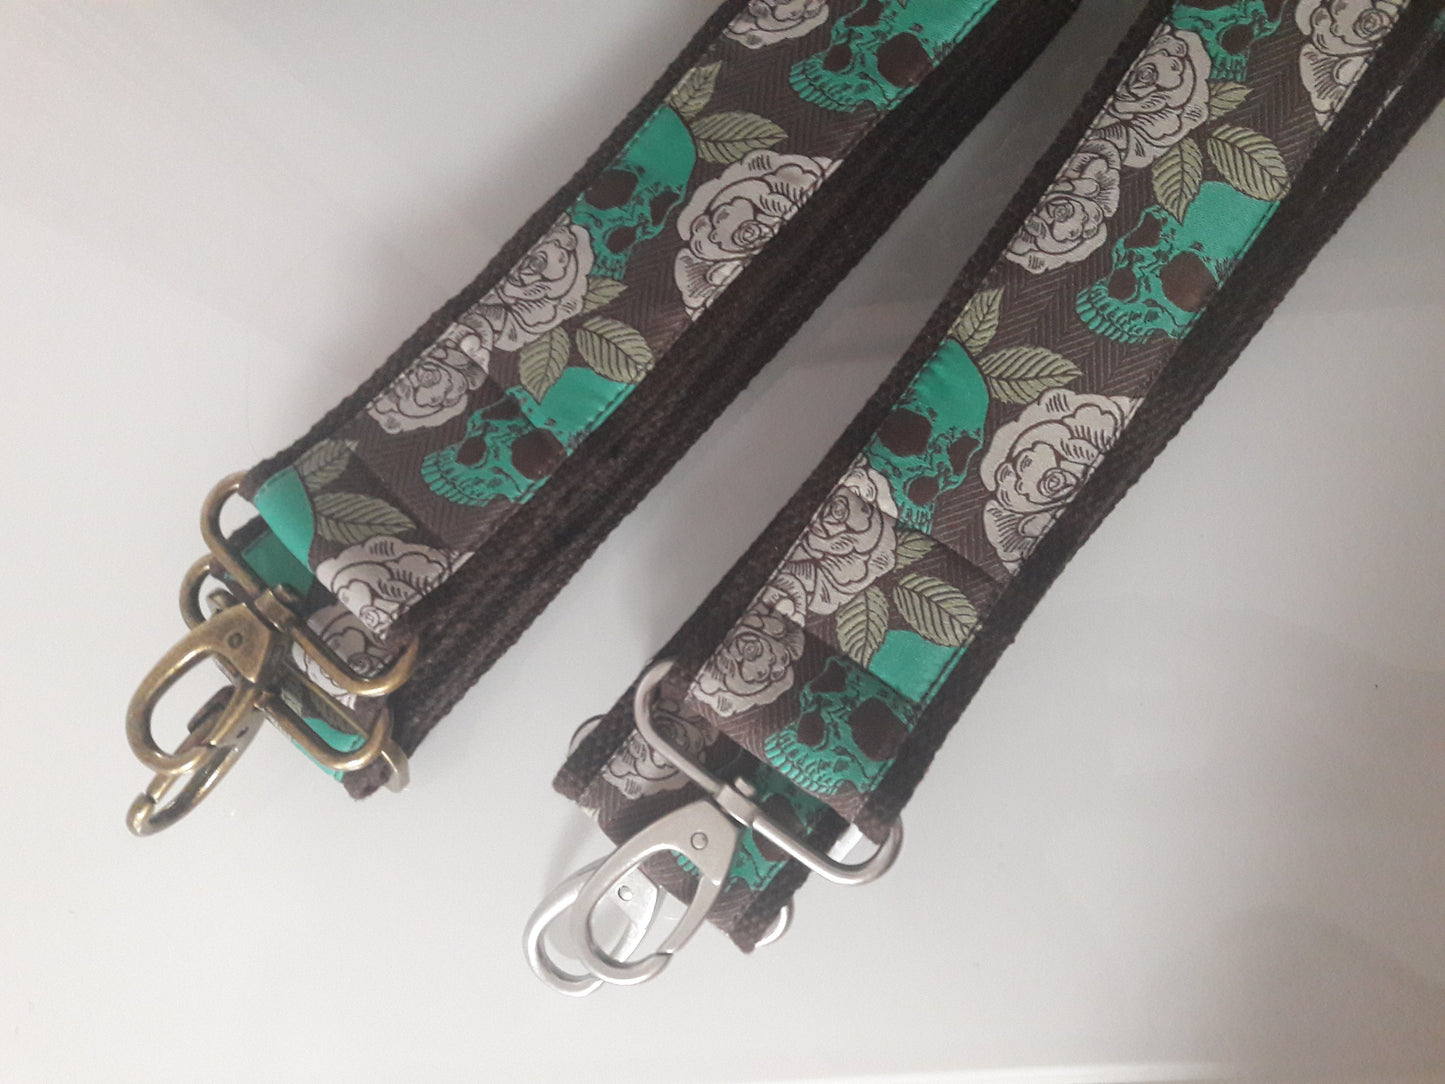 Colorful bag strap with carabiner - Emerald Pirate